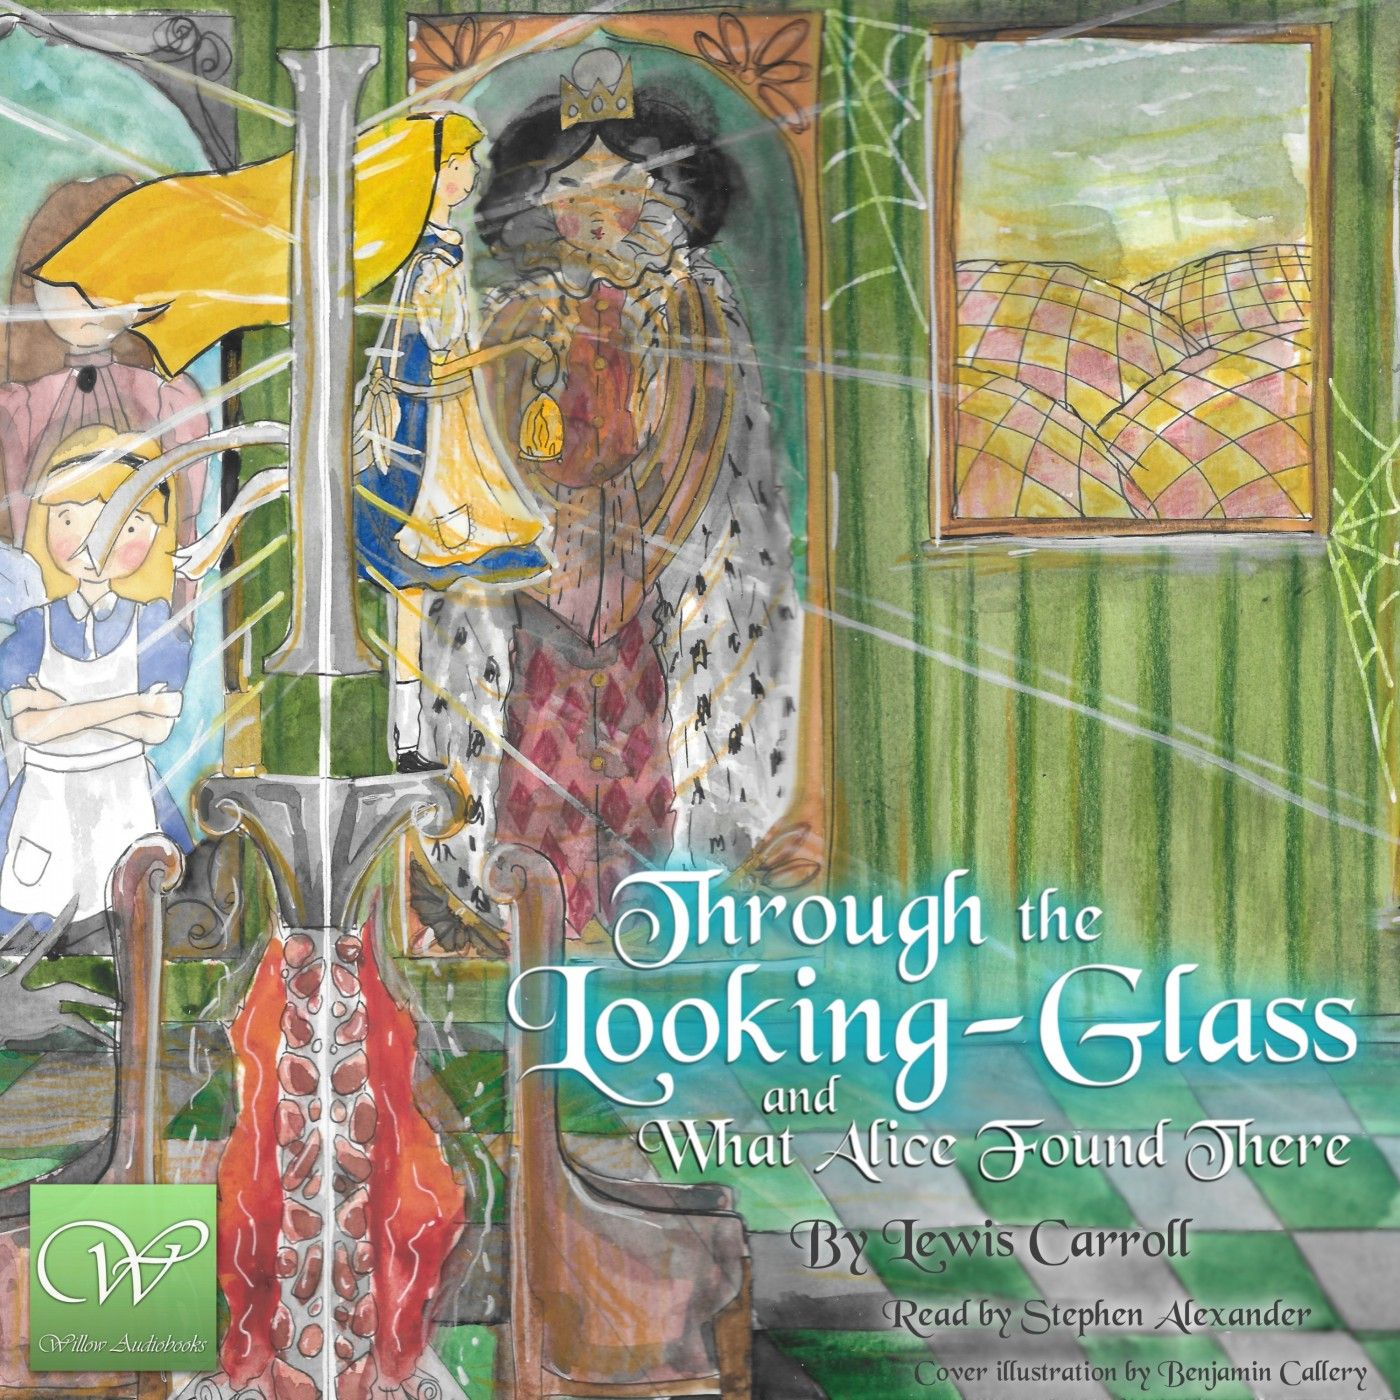 Through the Looking-Glass | Part 5 (Ch 9-12)